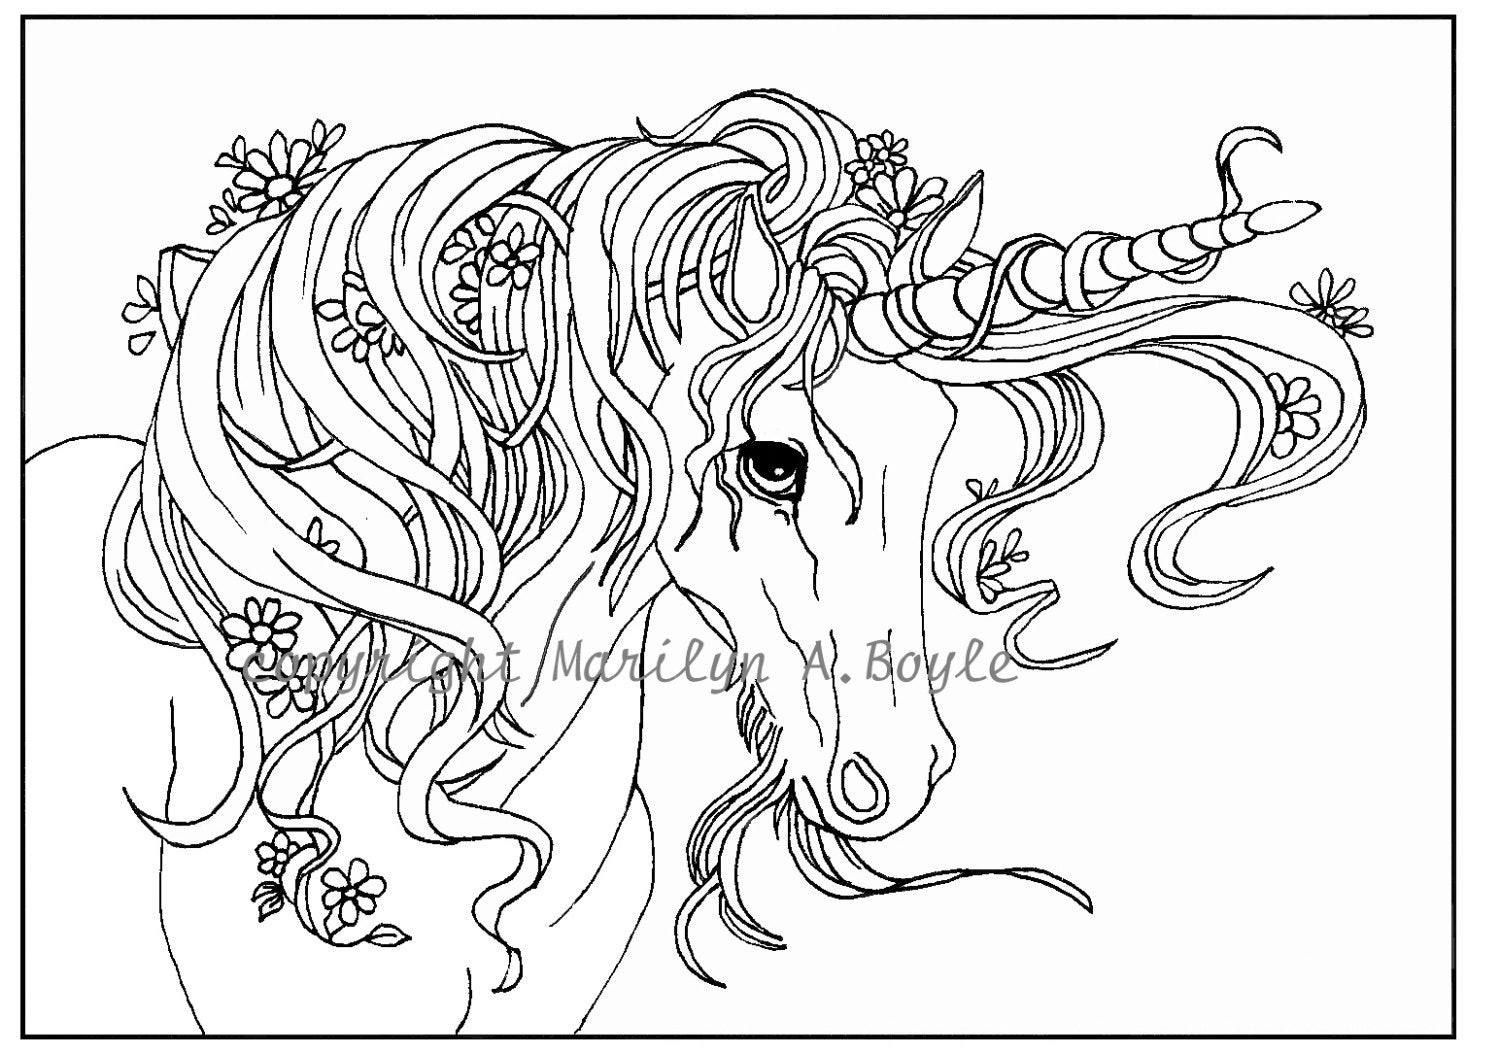 Printable Coloring Pages Of Unicorns
 ADULT COLORING Page digital Unicorn flowers